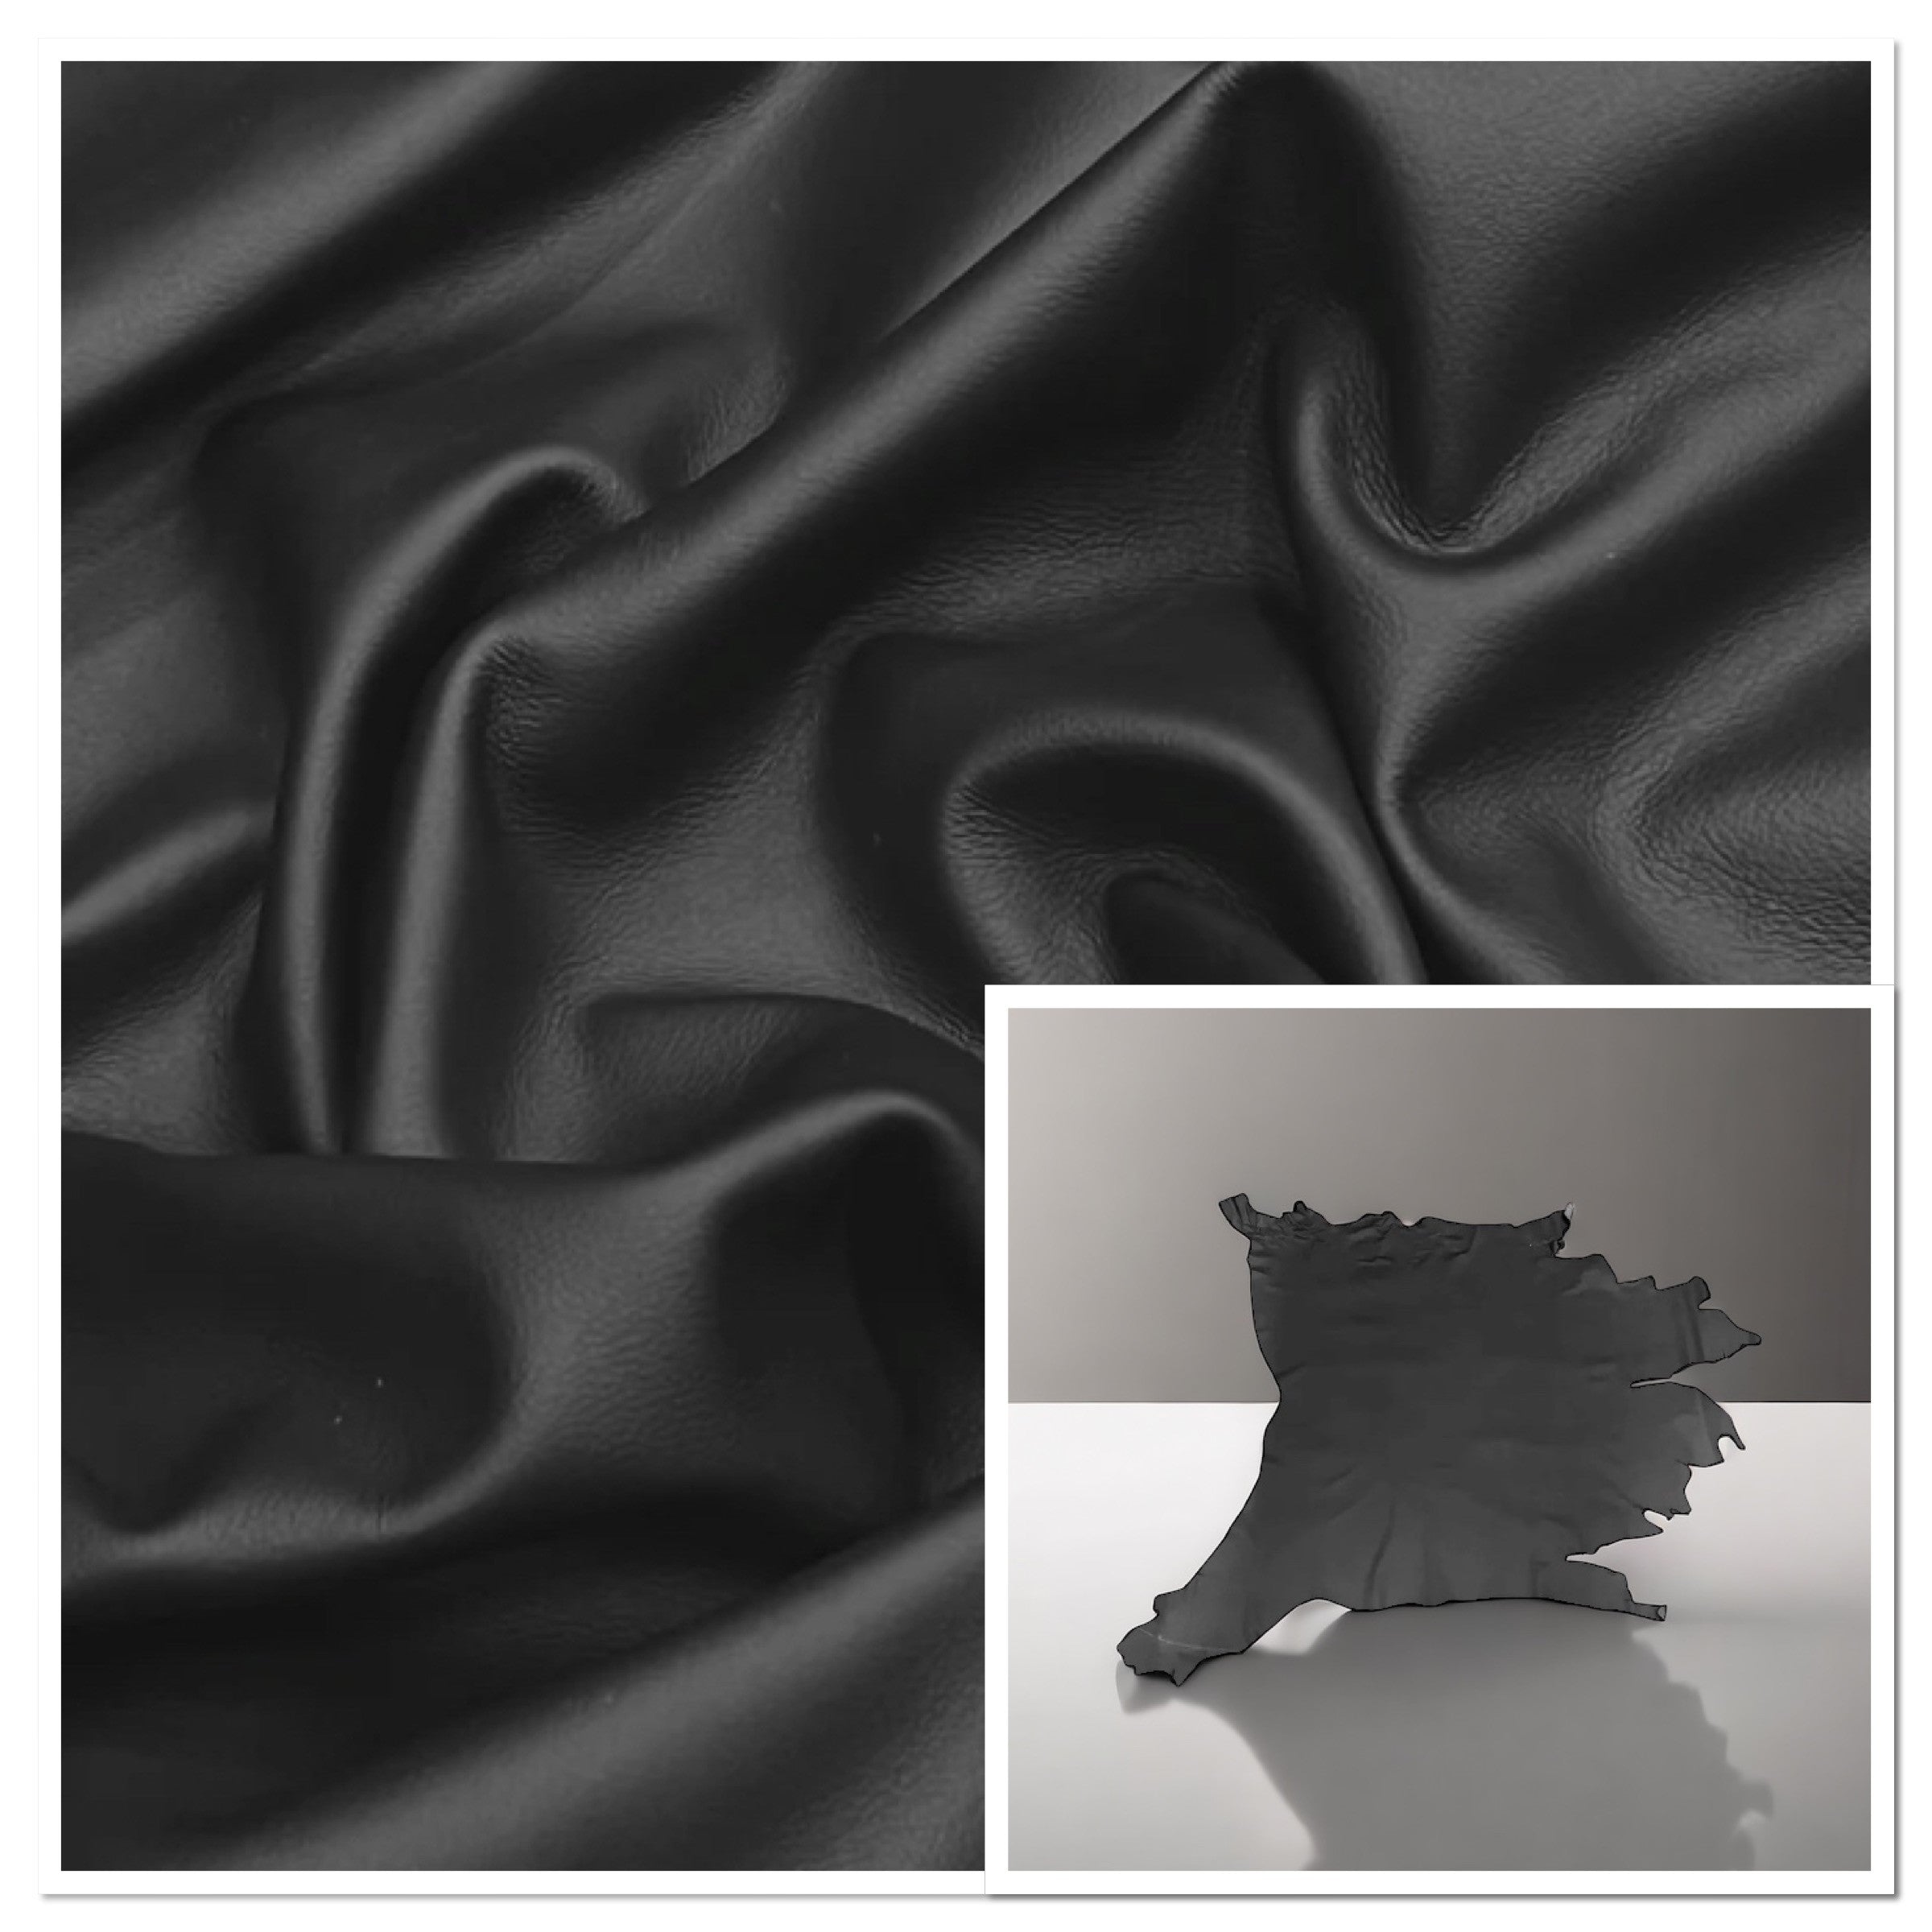 Minerva Black, Smooth Grain Upholstery Leather : 1.1-1.3mm (Ex Pittards Stock)